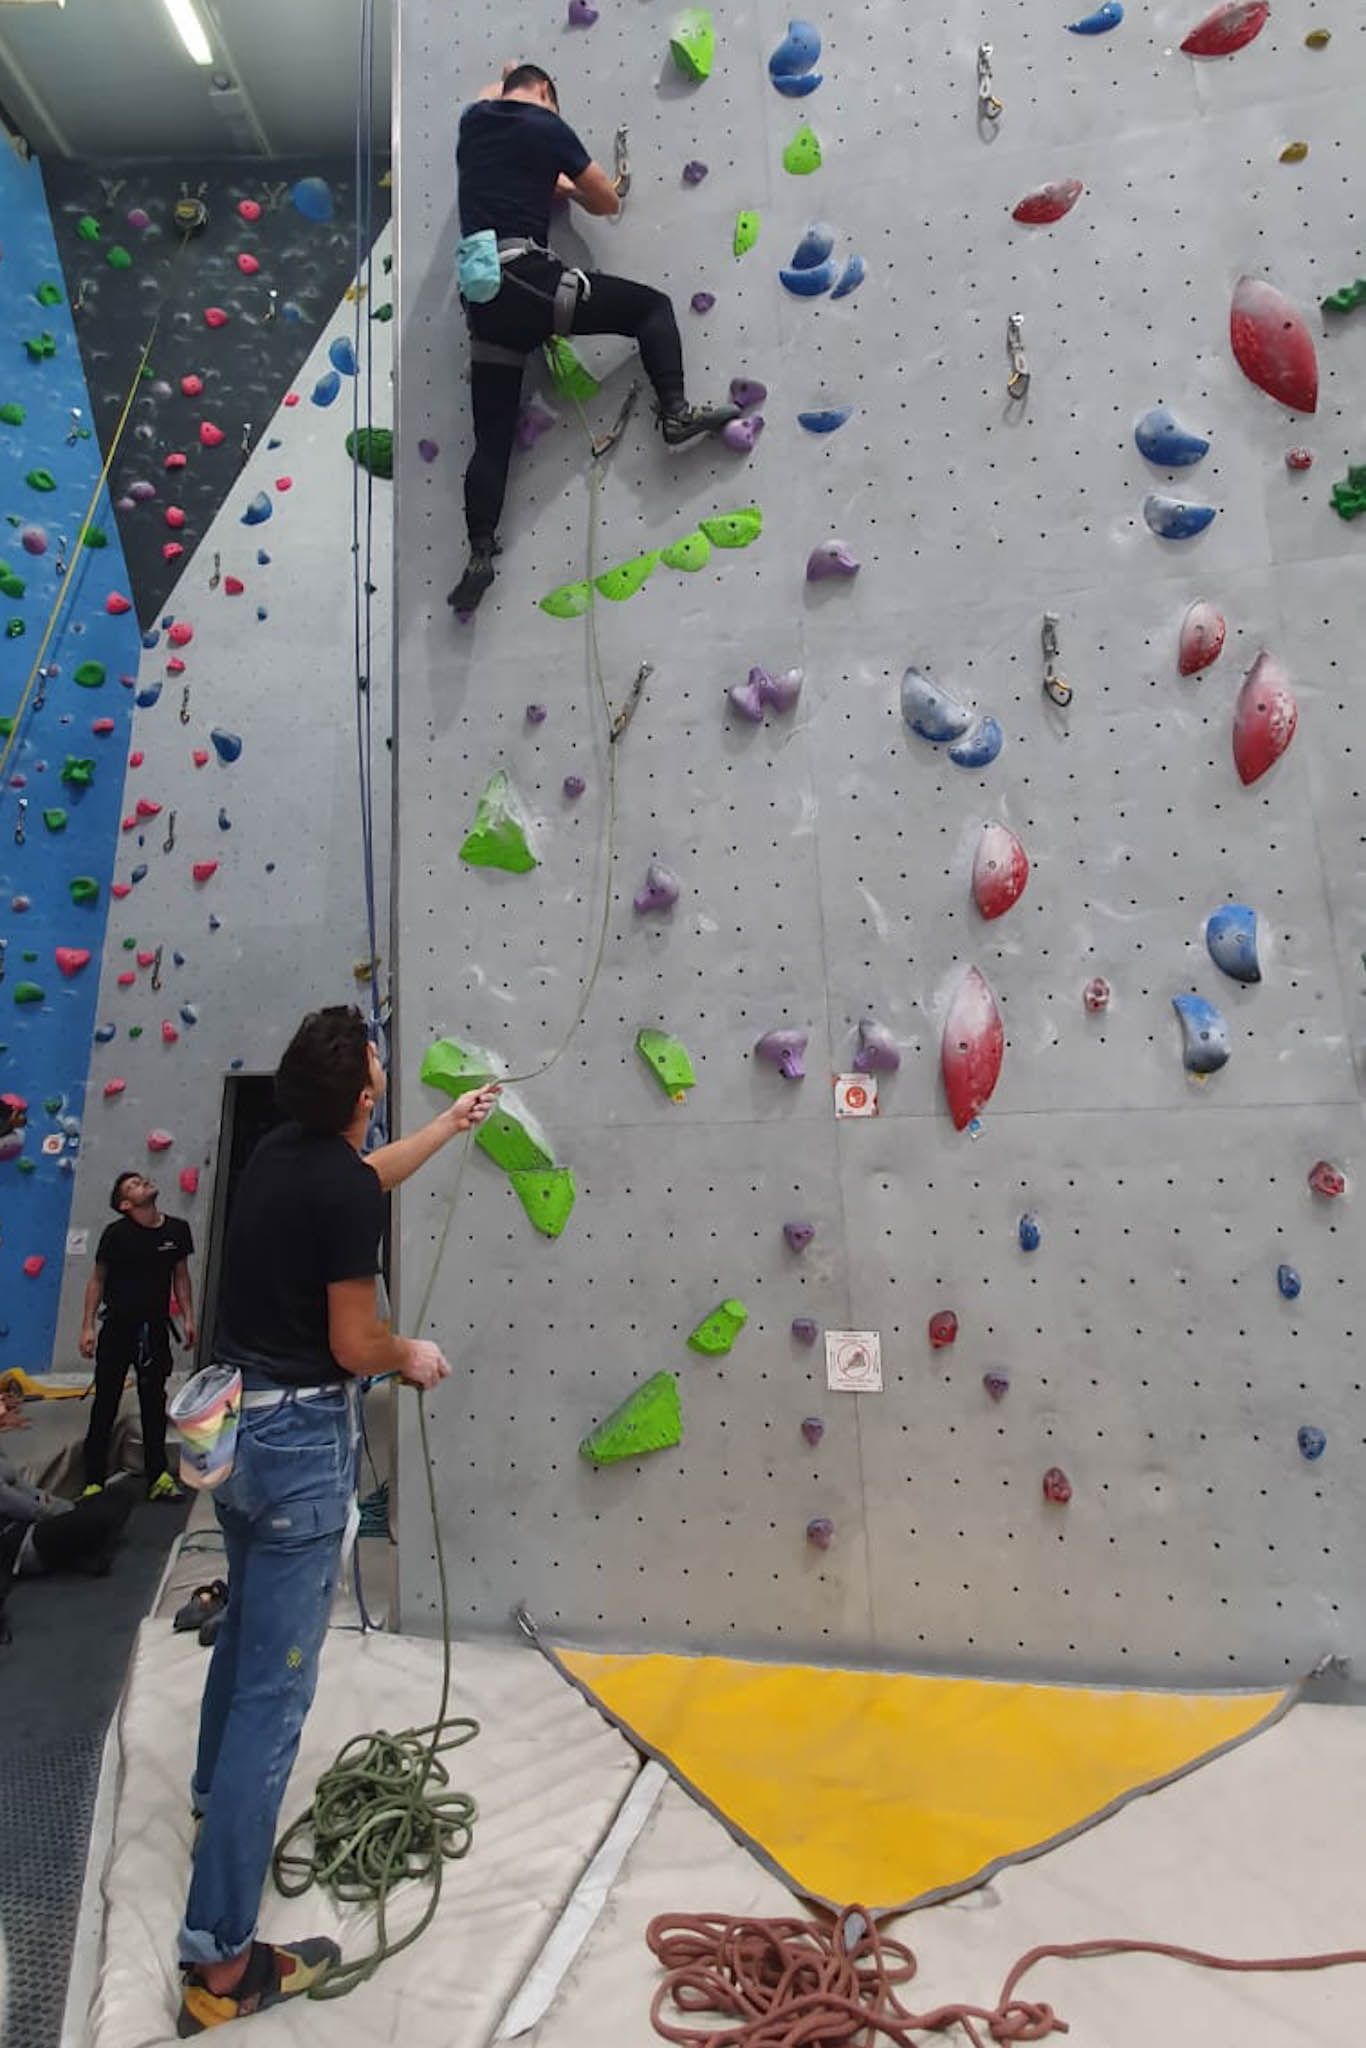 Felix leading a climb with a 5 rating, and Angel belaying.